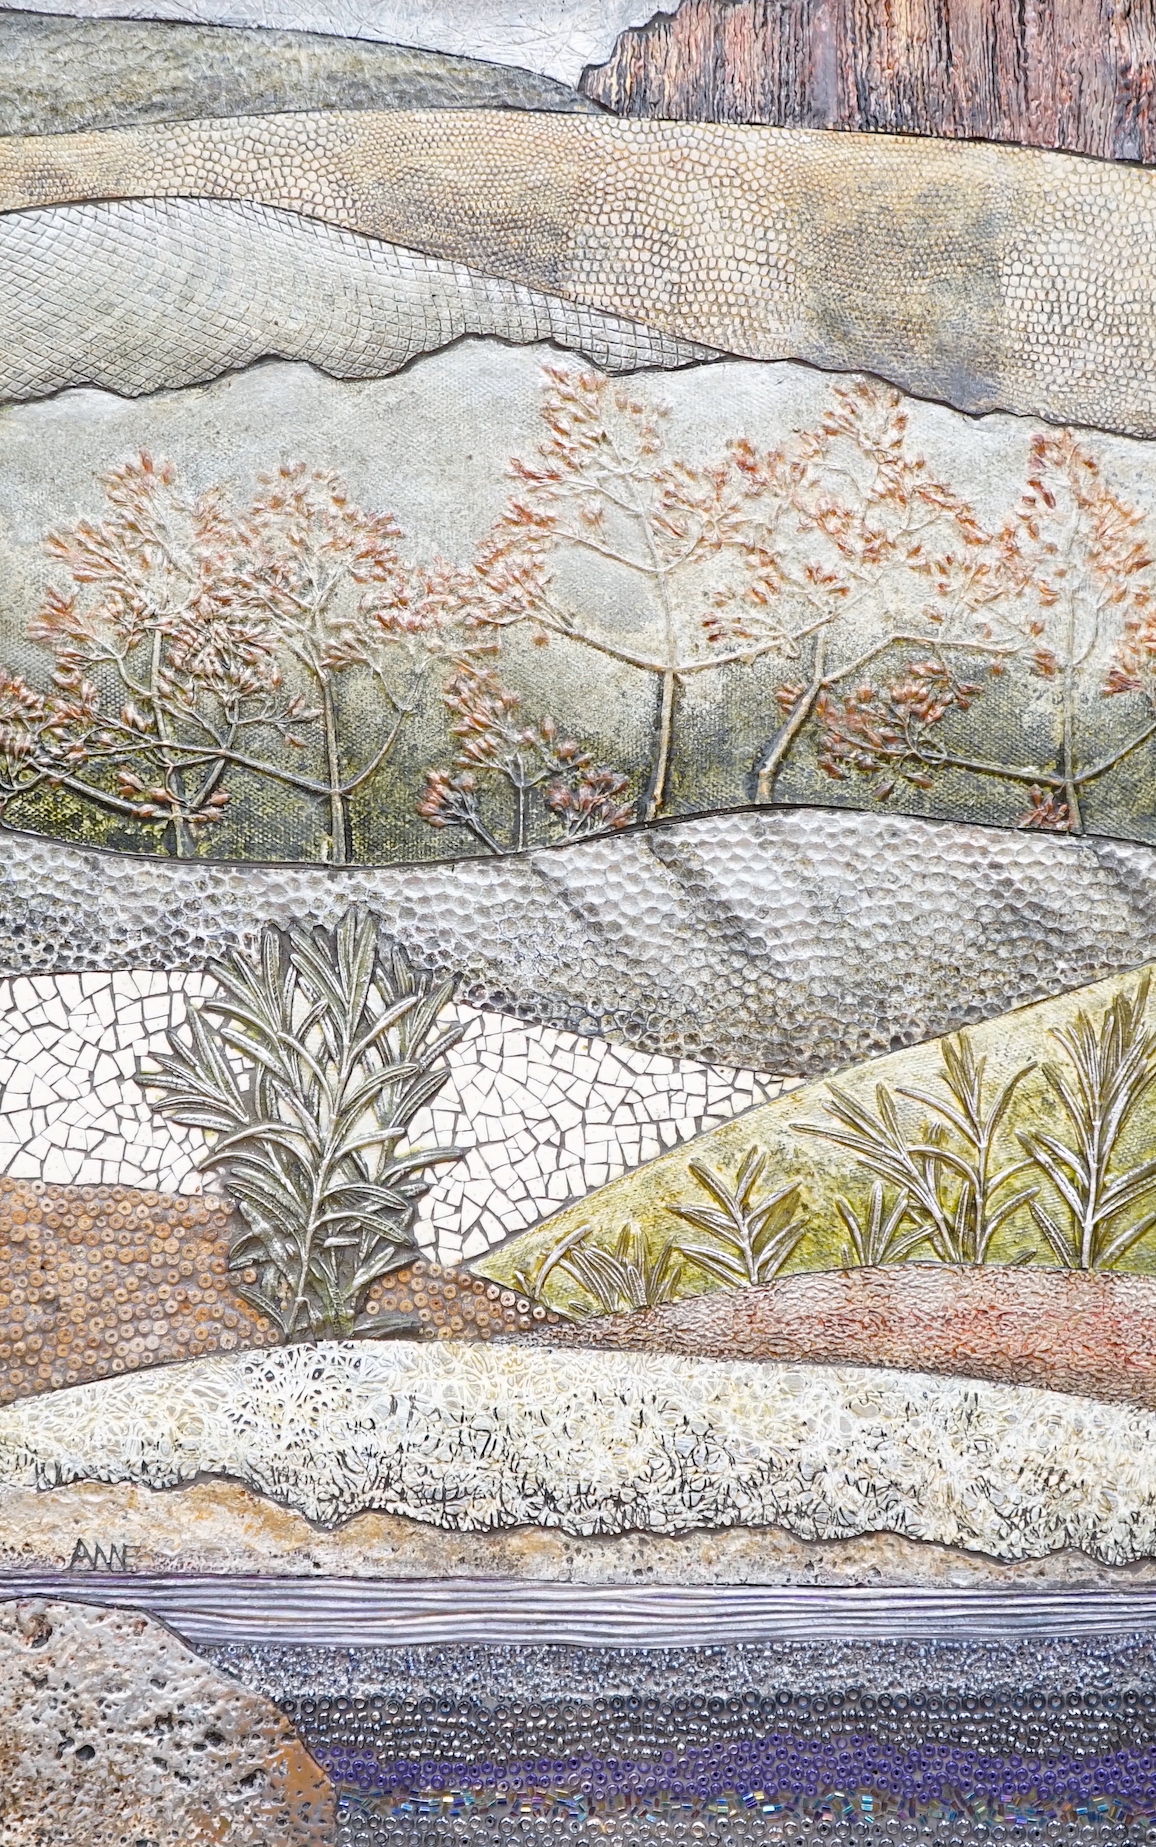 Anne Raubenheimer (contemporary, South African), mixed media and collage plaque, Rosemary Stream, signed, 43 x 26cm